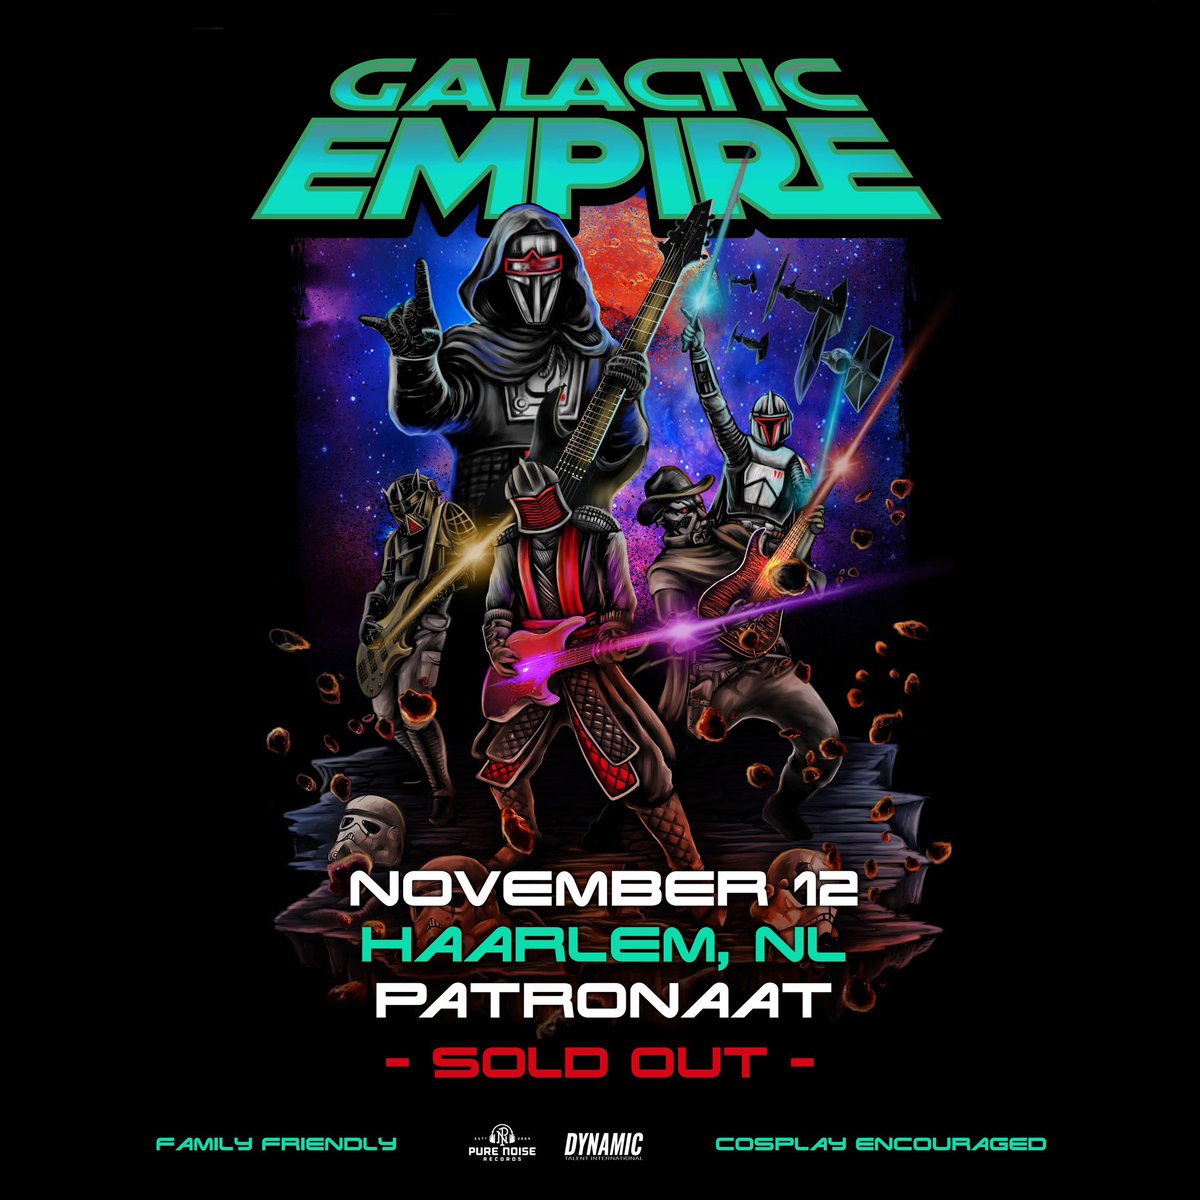 November 12 - Haarlem, NL @patronaat023 is SOLD OUT! Tickets are still available for the remainder of the tour so get yours today! #galacticempire #starwars #metal #tour #europe